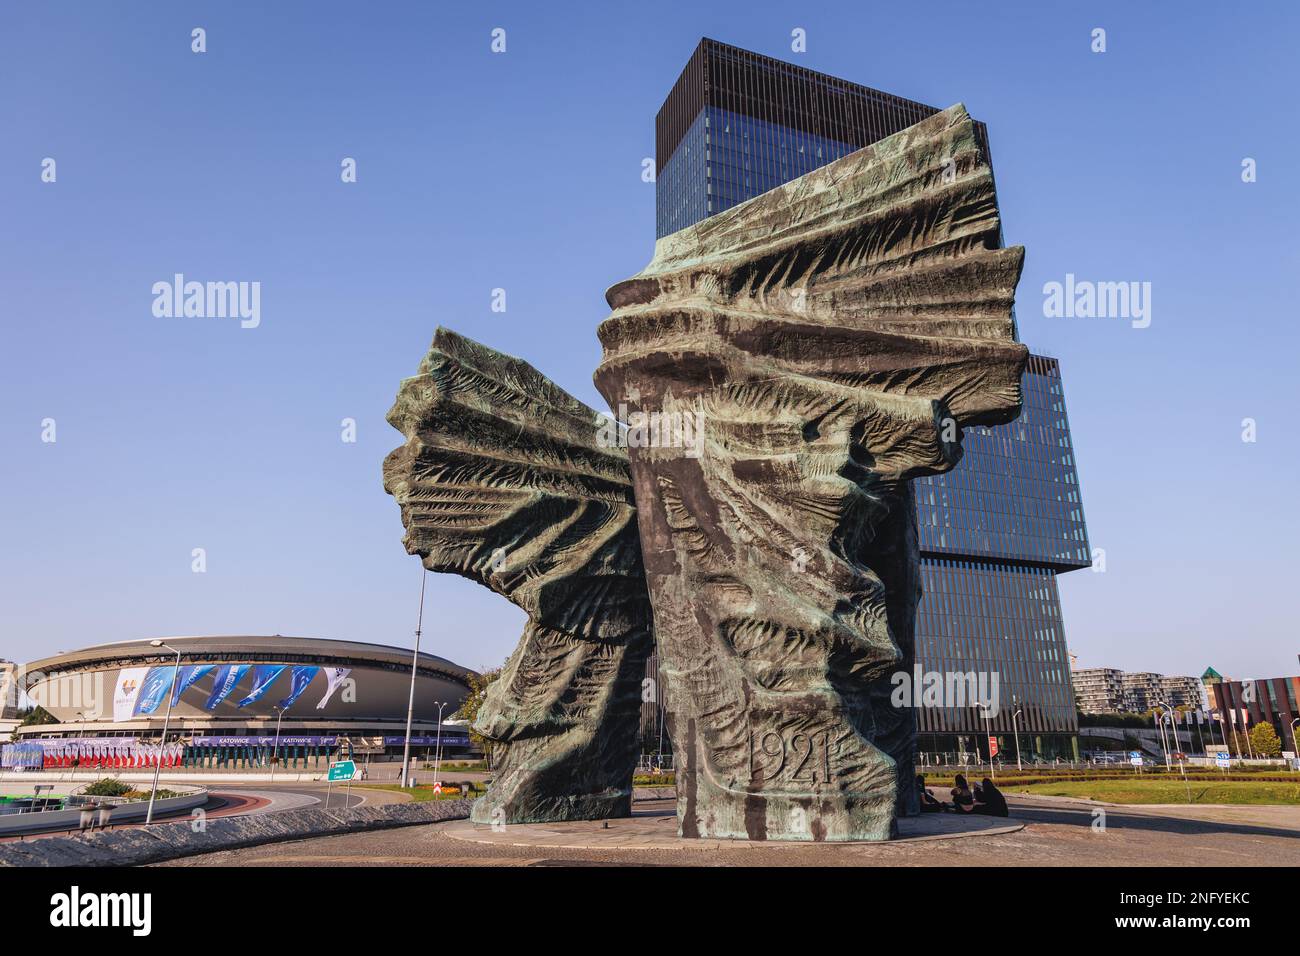 Silesian Insurgents Monument, .KTW office building and Spodek Arena in Katowice city, Silesia region of Poland Stock Photo